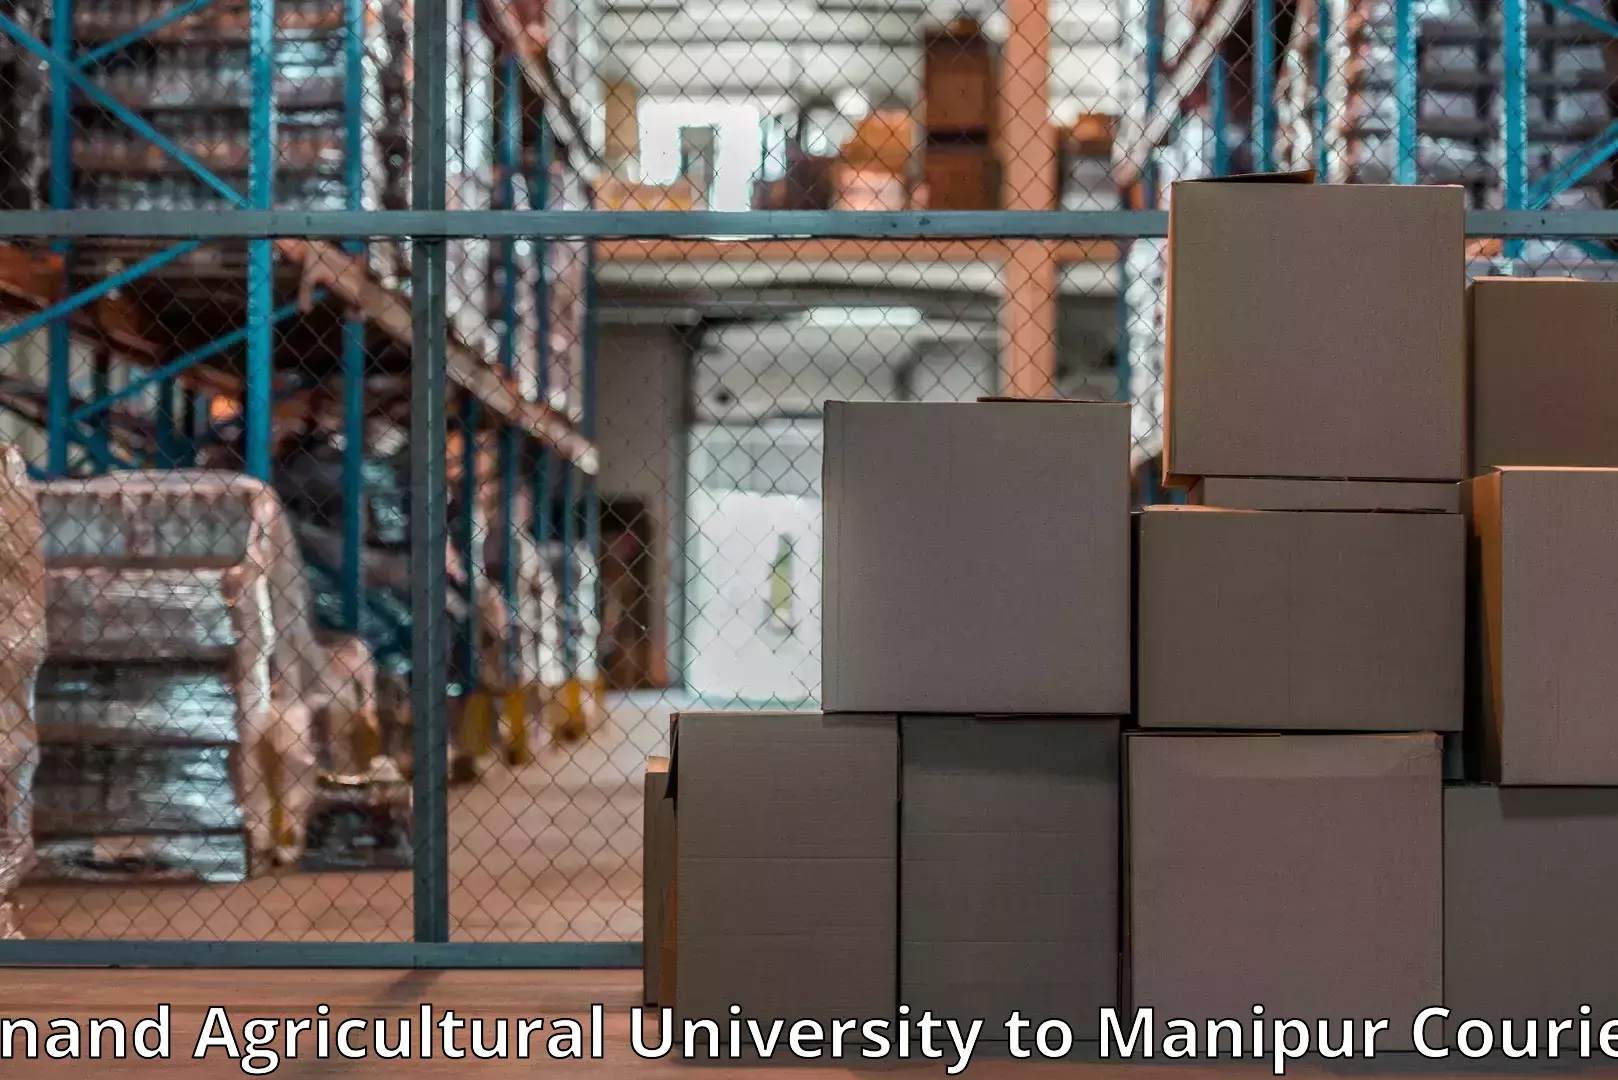 Professional moving assistance Anand Agricultural University to Kaptipada